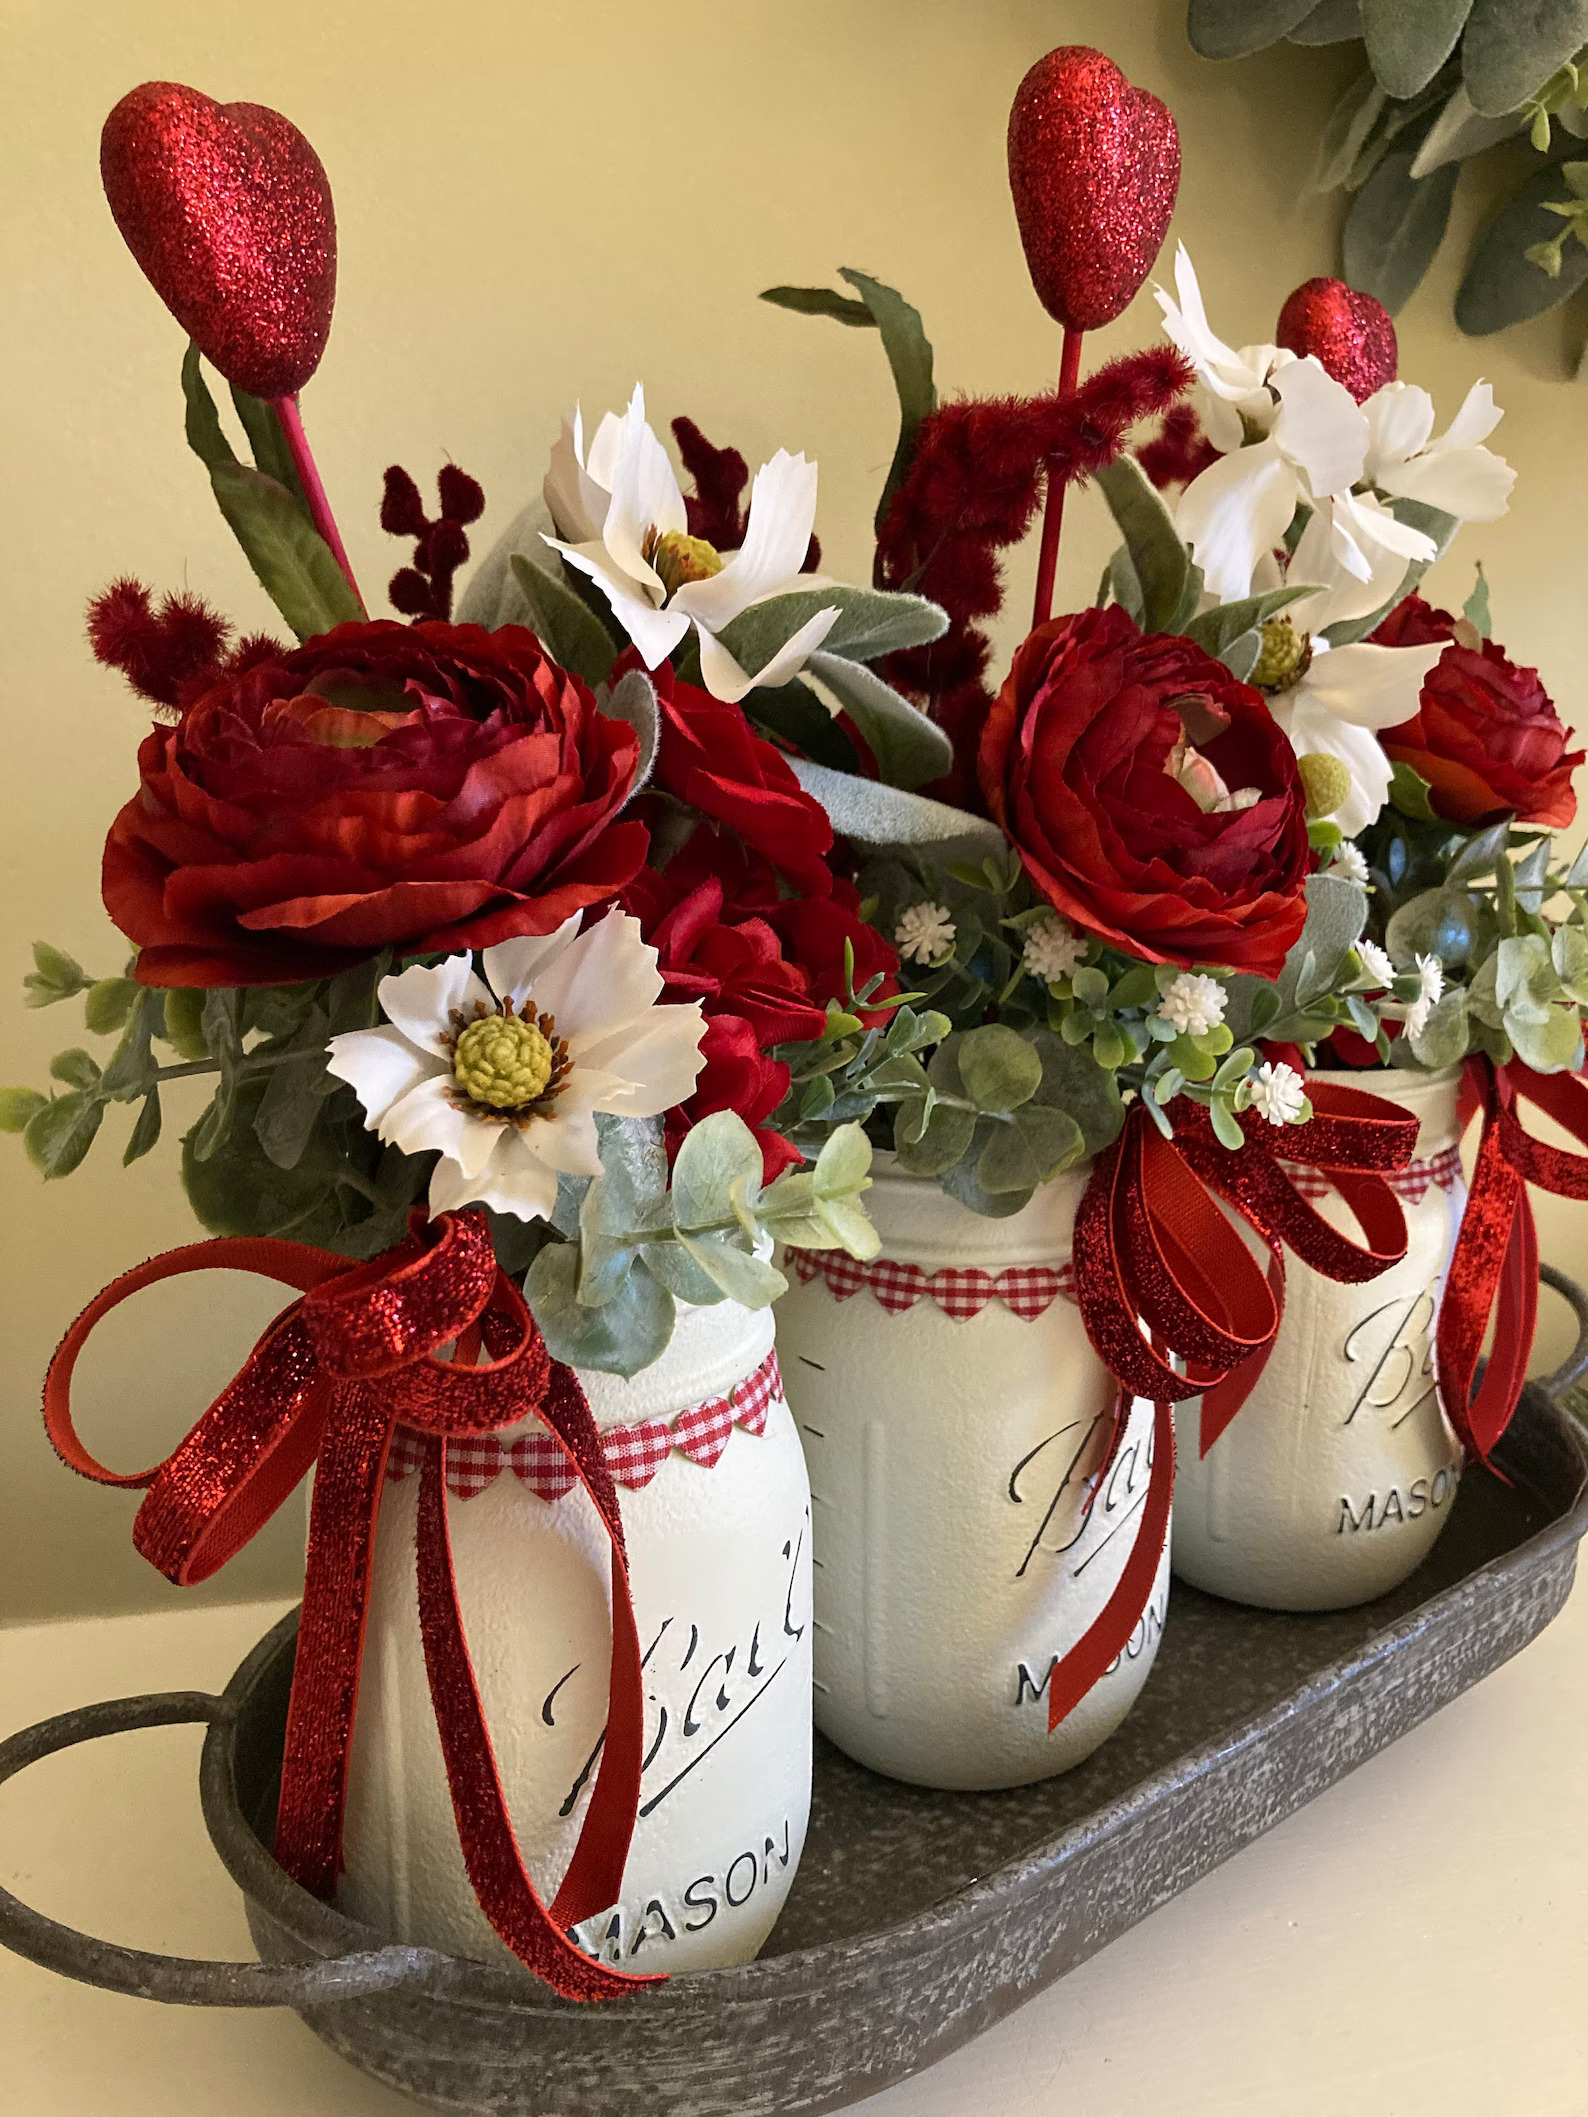 16 Lovely Valentine's Day Centerpiece Ideas That Will Melt Your Heart